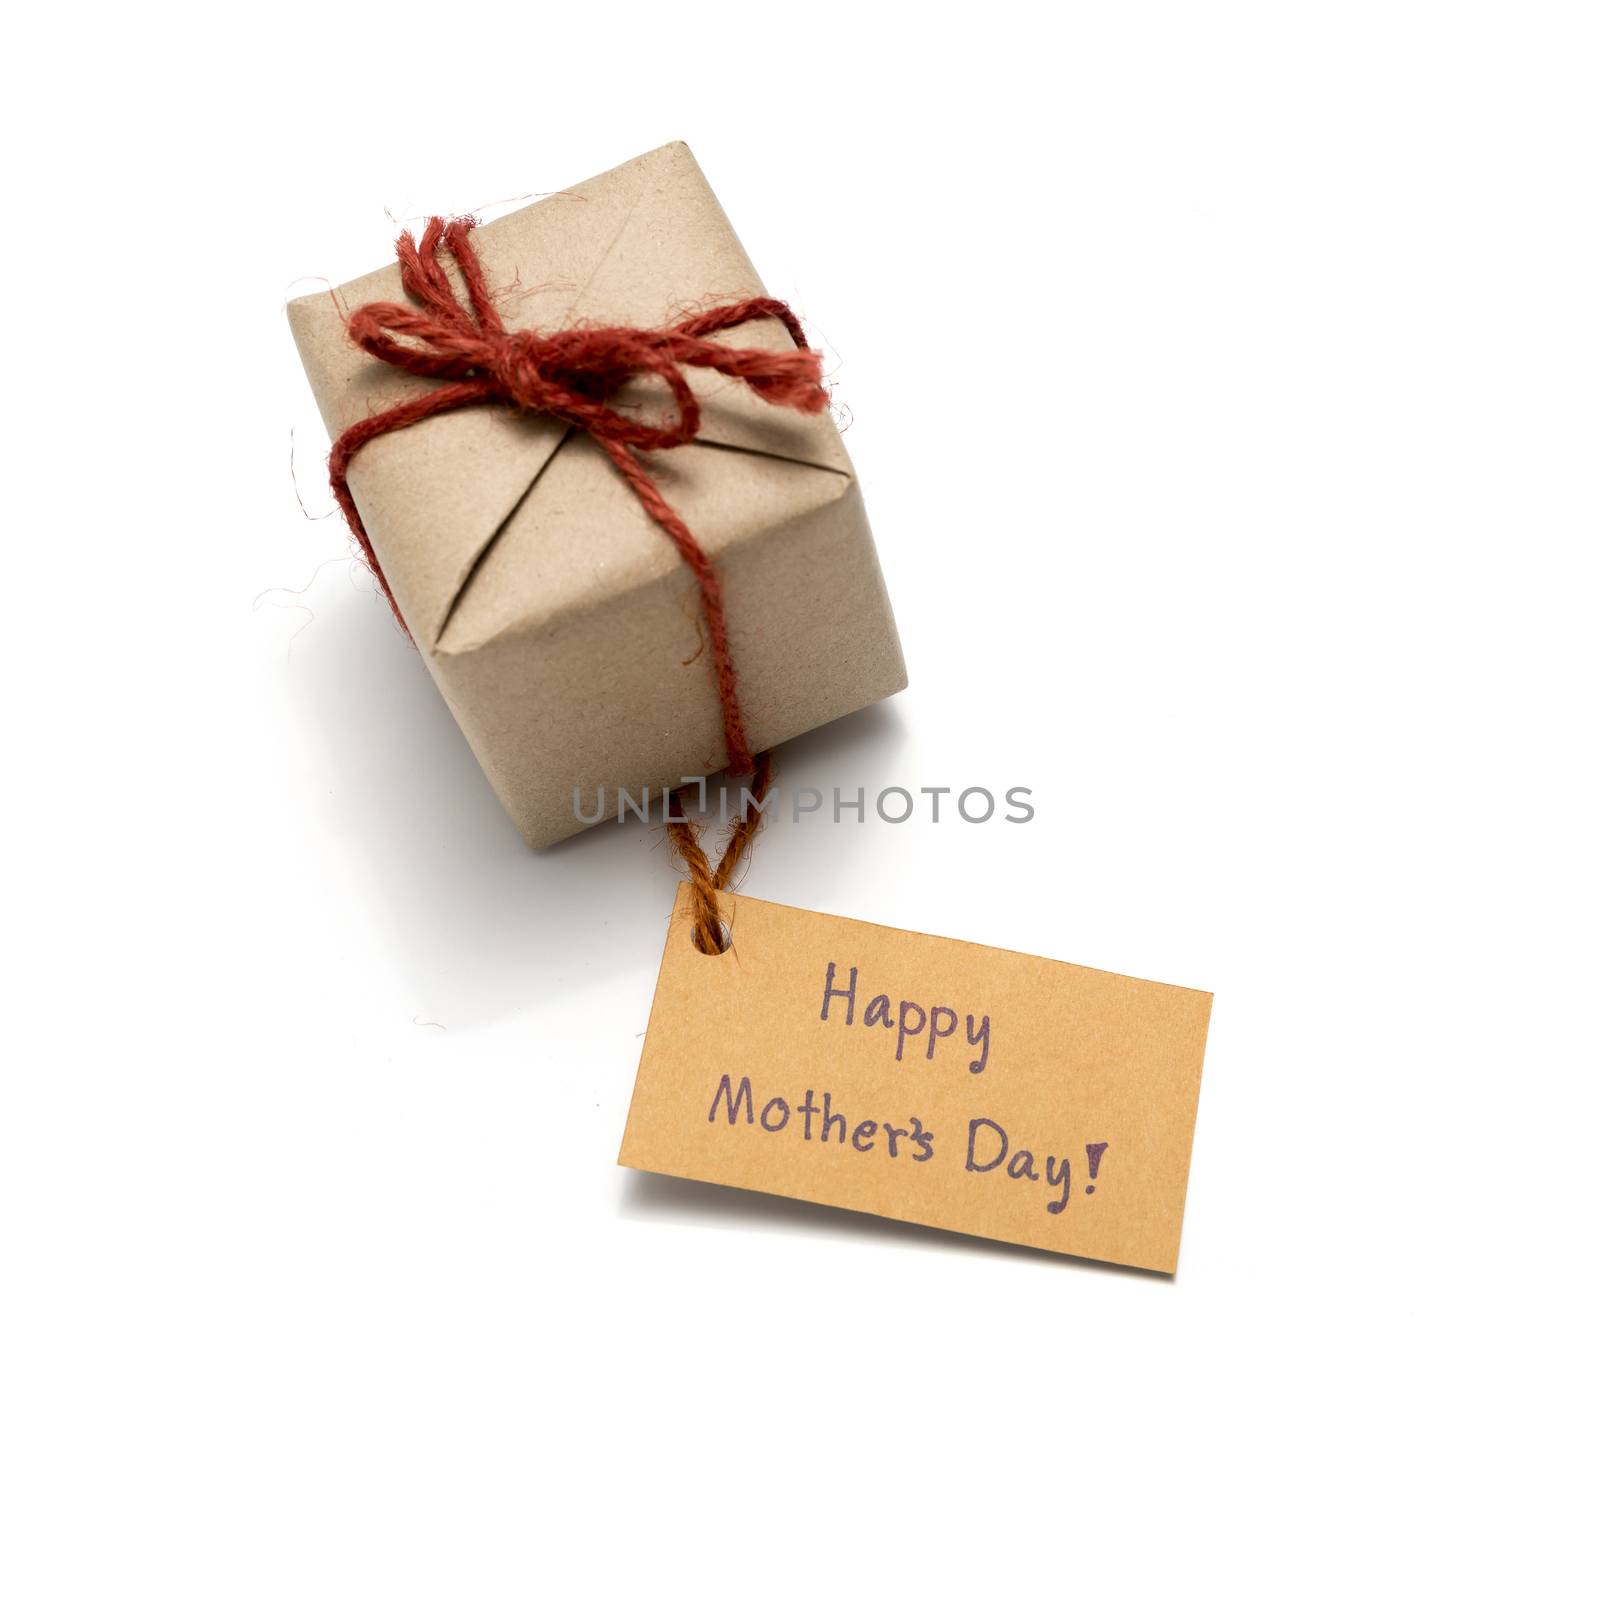 happy mother's day card and gift box by ammza12